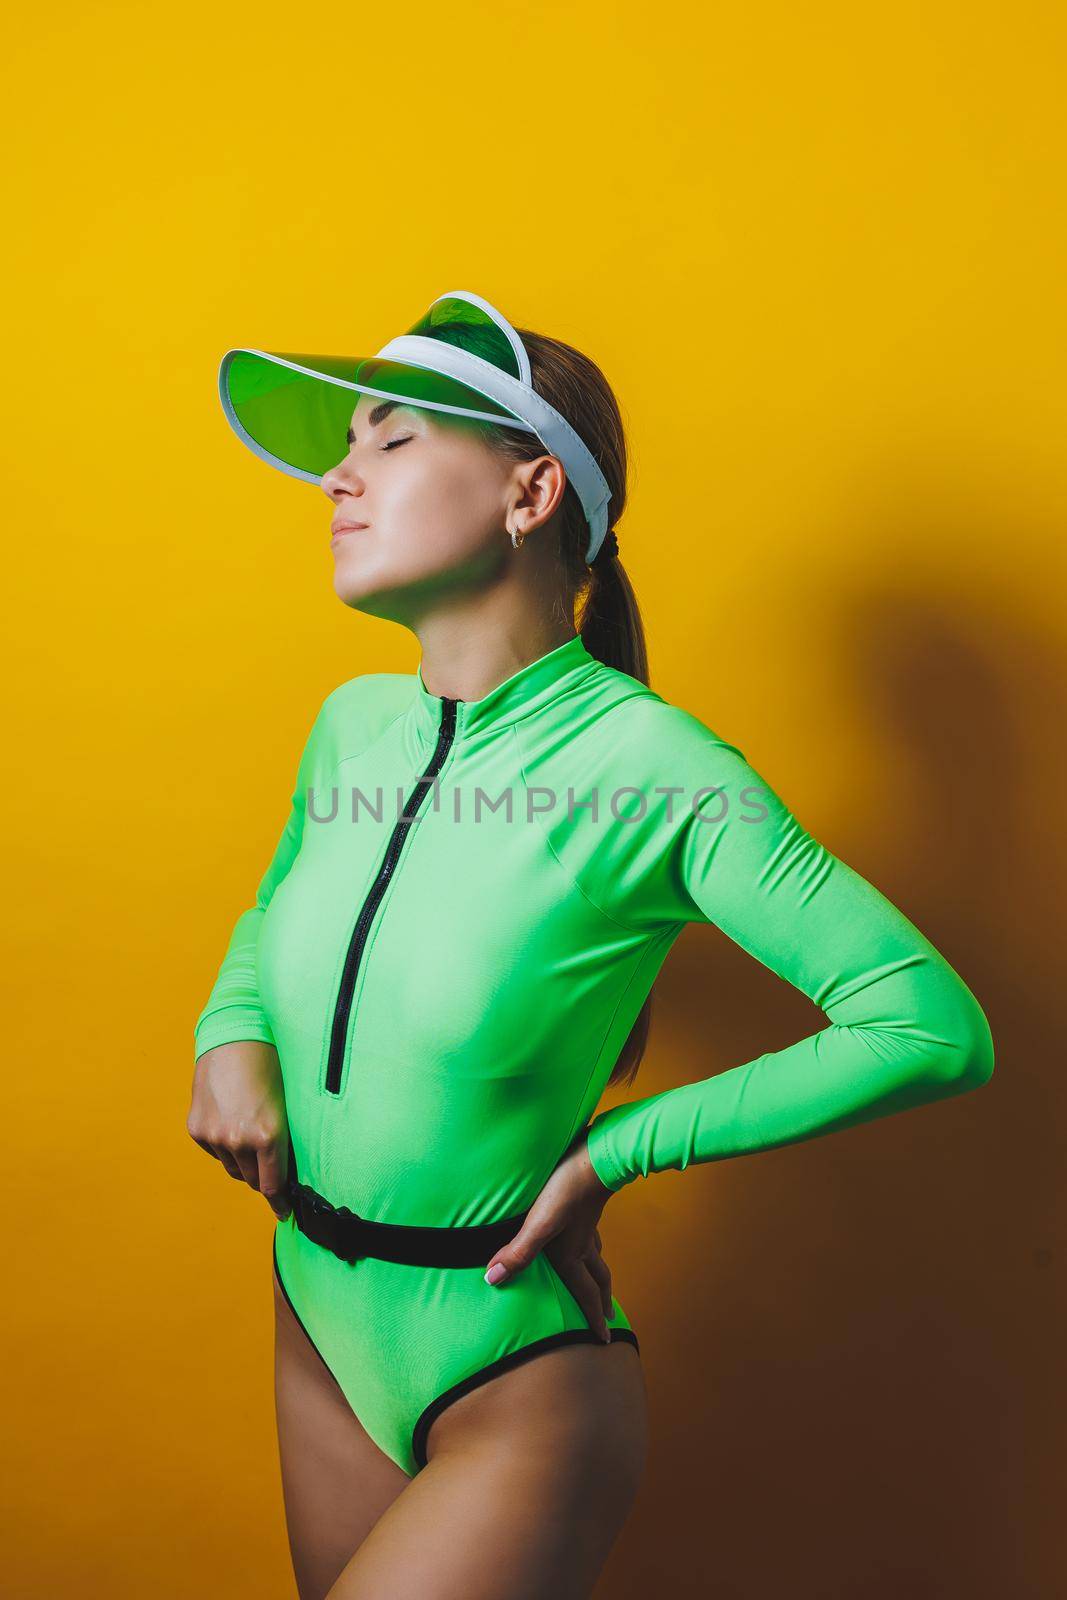 Attractive woman in bright green beach swimsuit, hat, on bright yellow background with perfect body. Isolated. Studio shot. by Dmitrytph